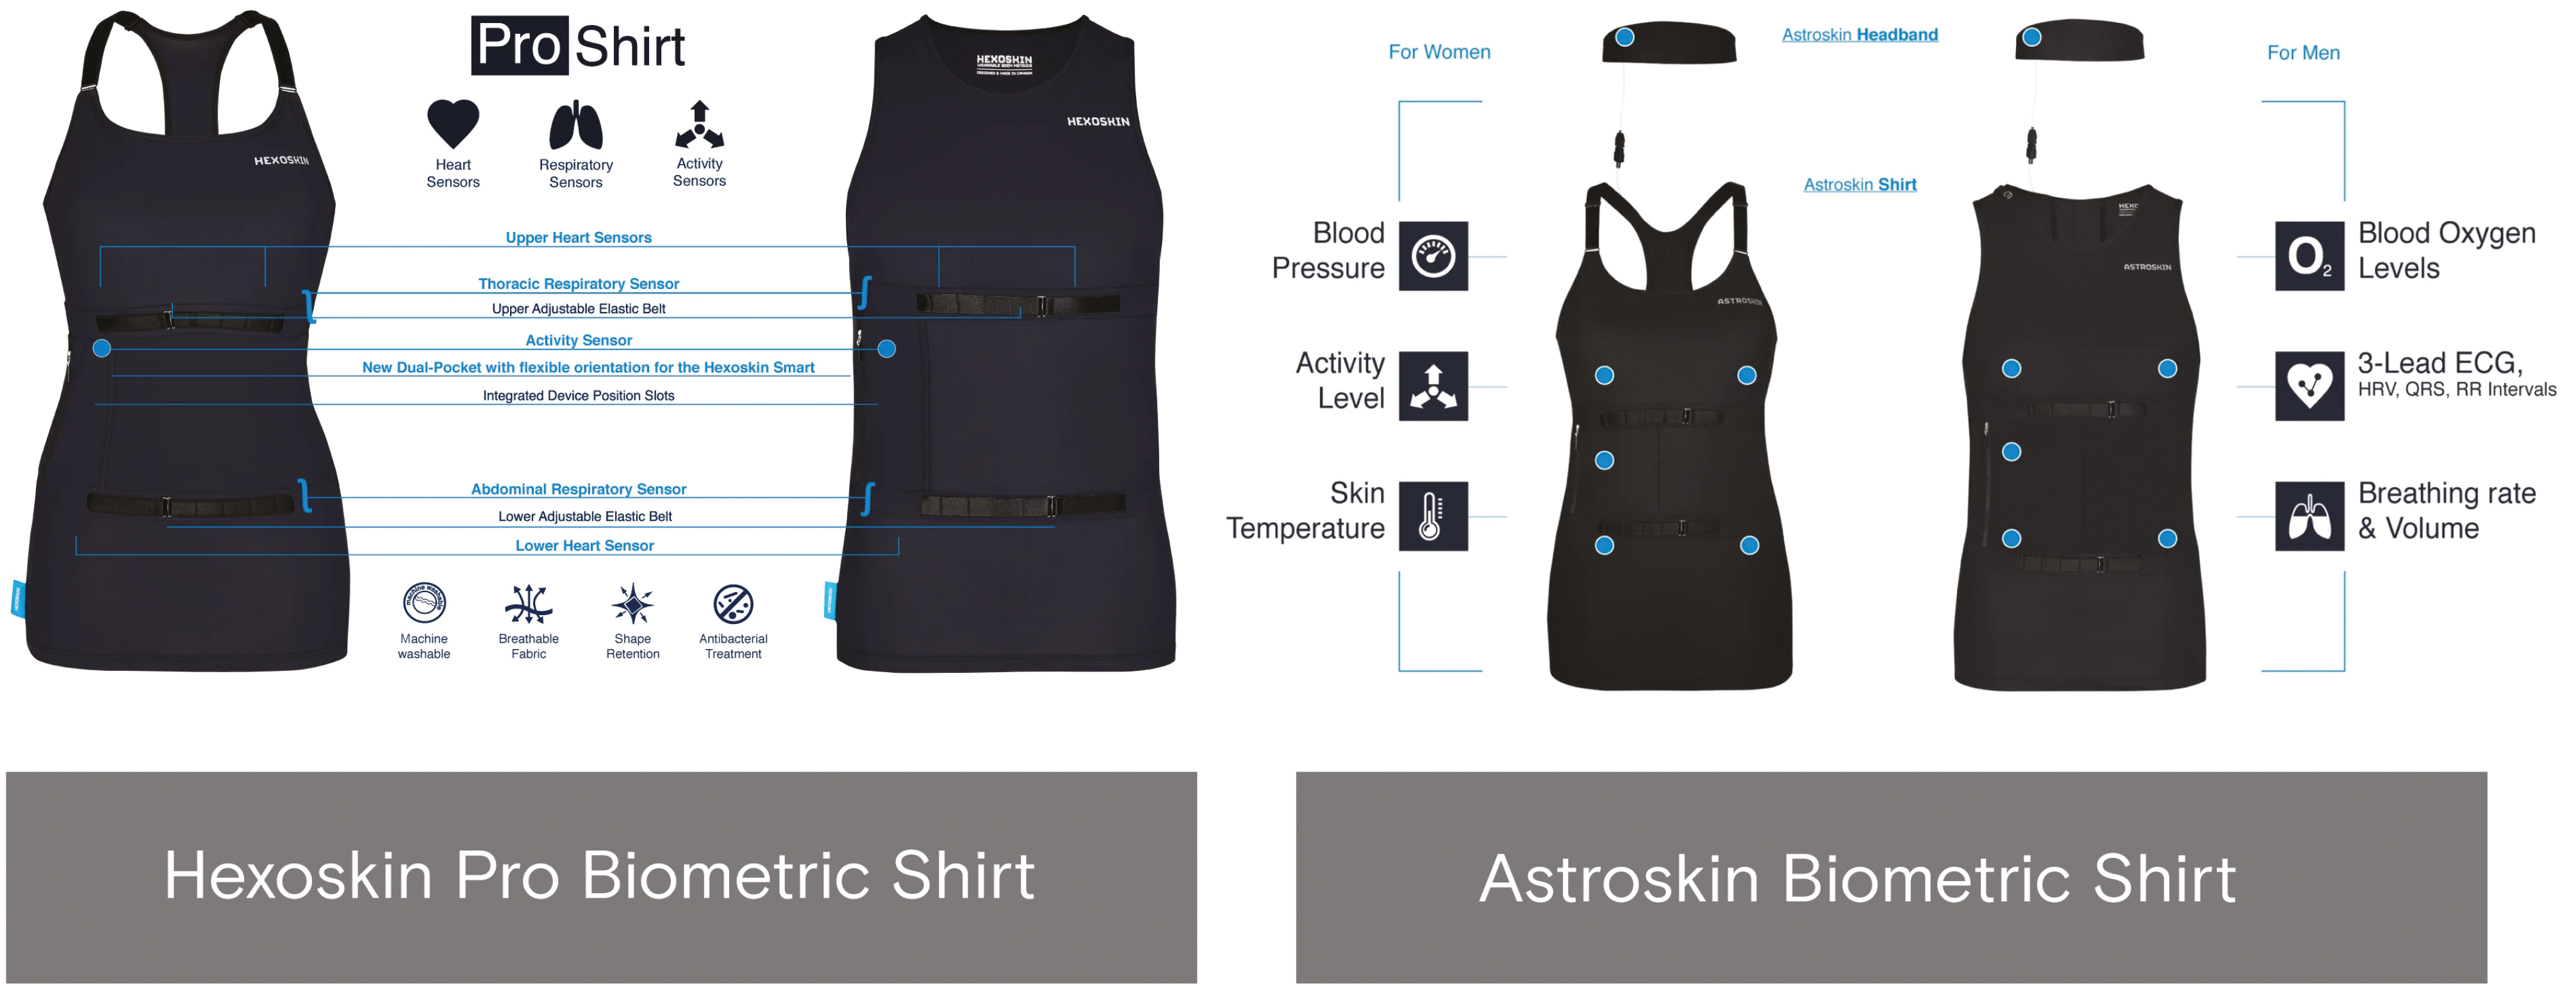 Comparison of the features of the Hexoskin and Astroskin biometric shirts. (Hexoskin Health Sensors & AI. Astroskin Space-Grade Smart Garments [Internet]. 2023. Available from: https://www.hexoskin.com/pages/astroskin-vital-signs-monitoring-platform-for-advancedresearch).